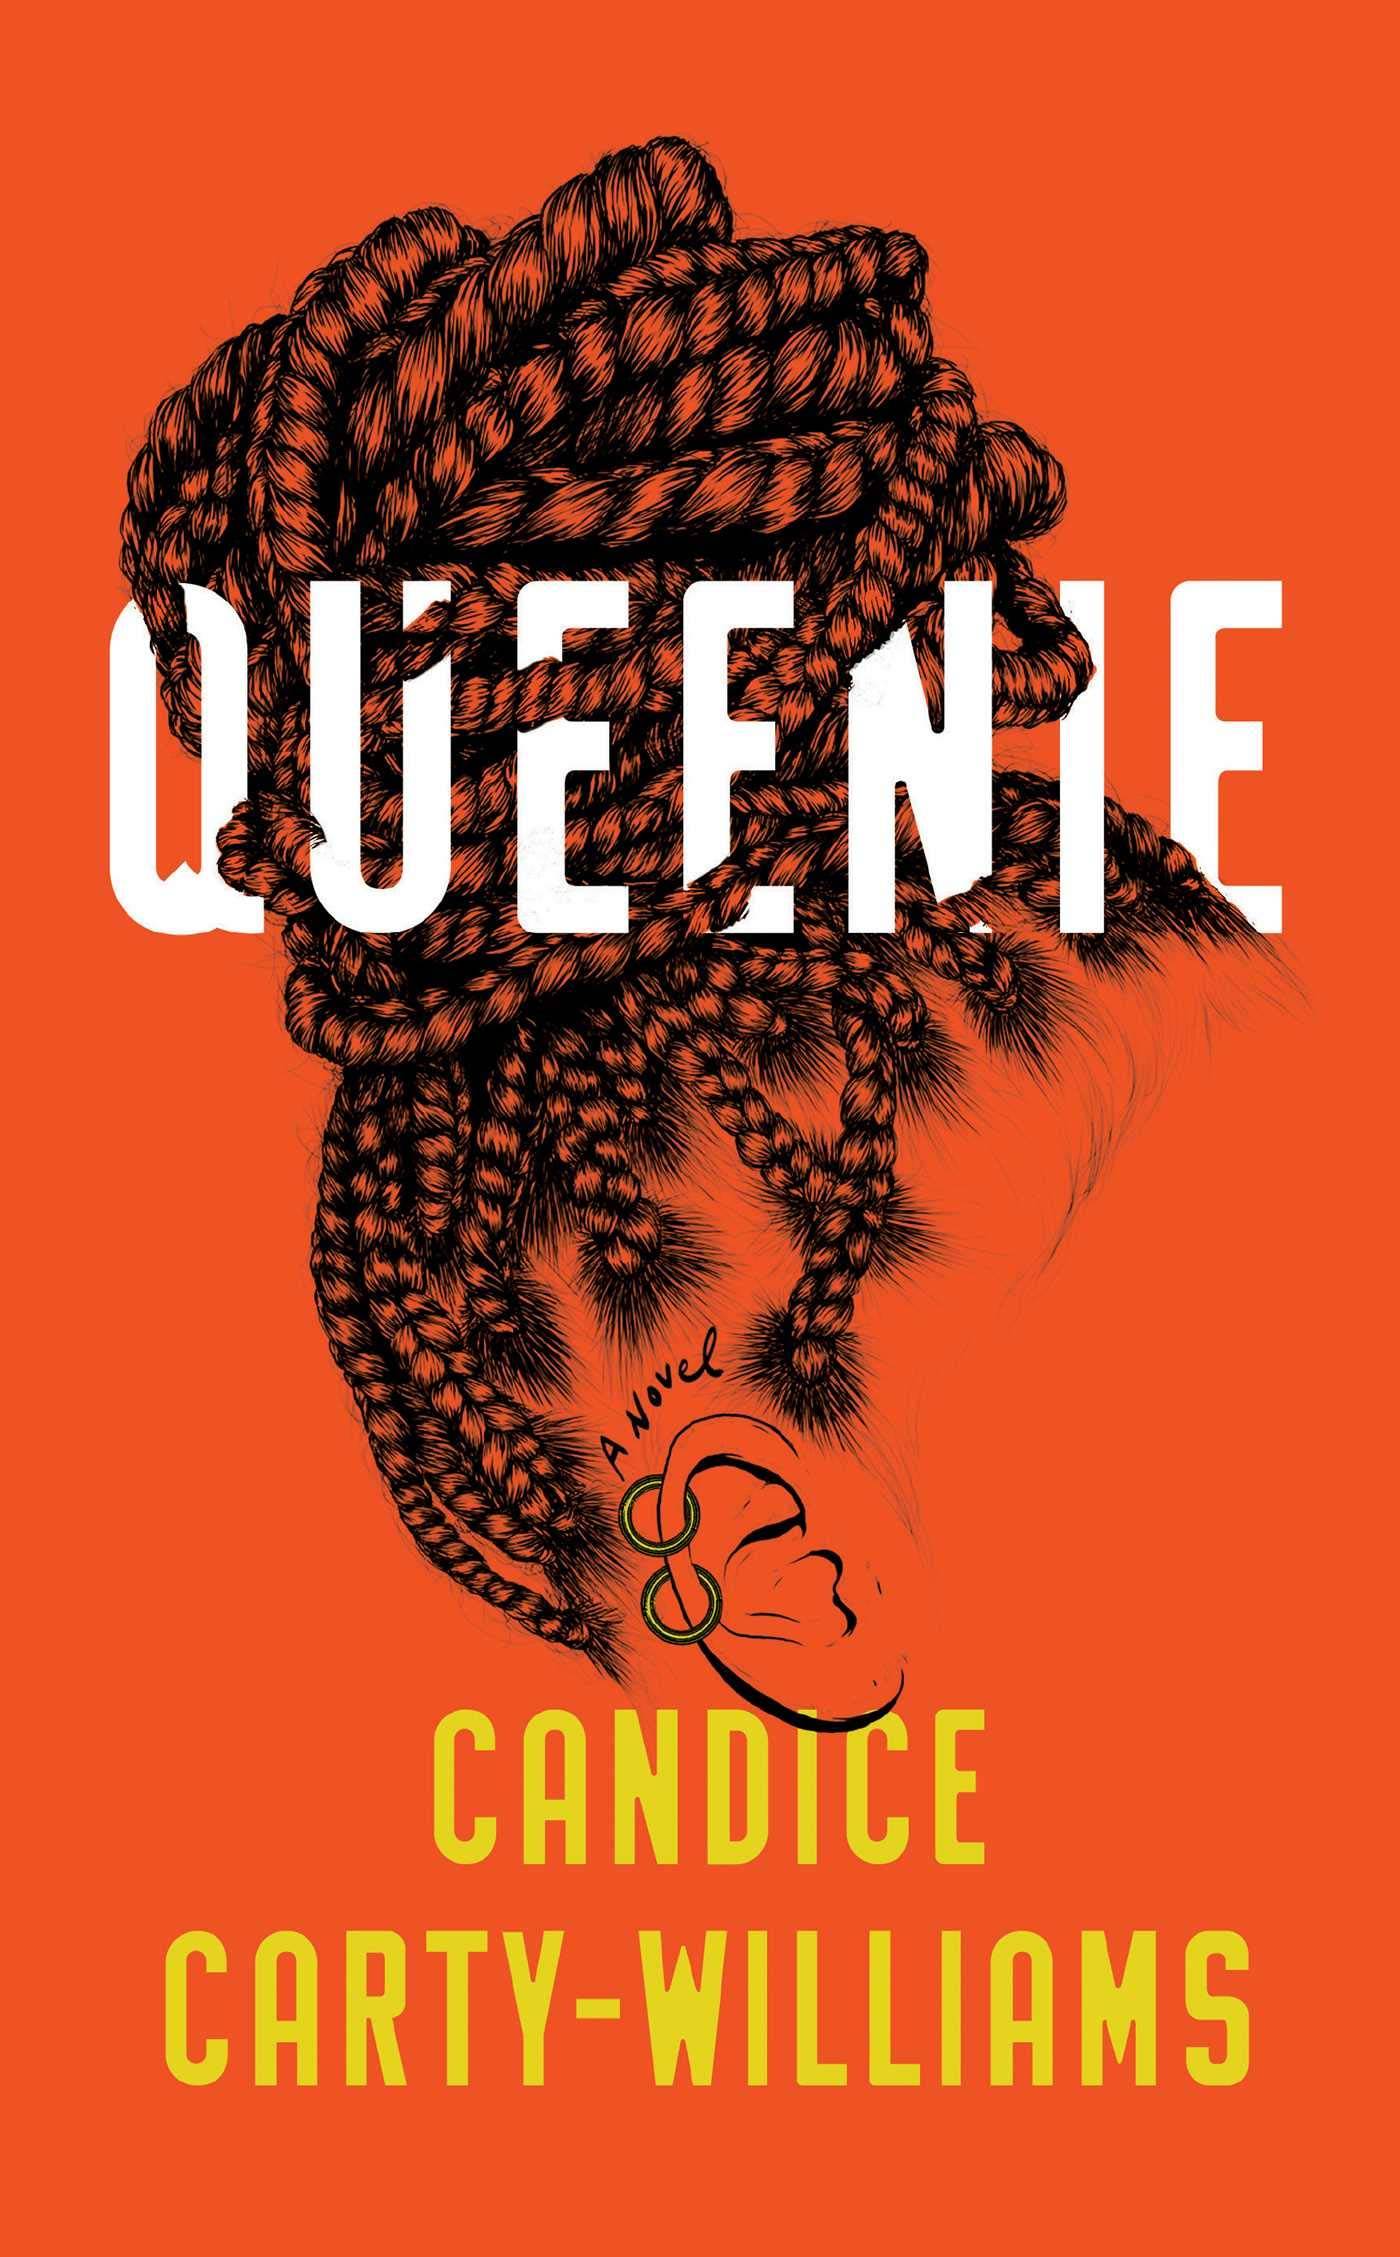 Orange book cover with illustration of a woman's hair in braids